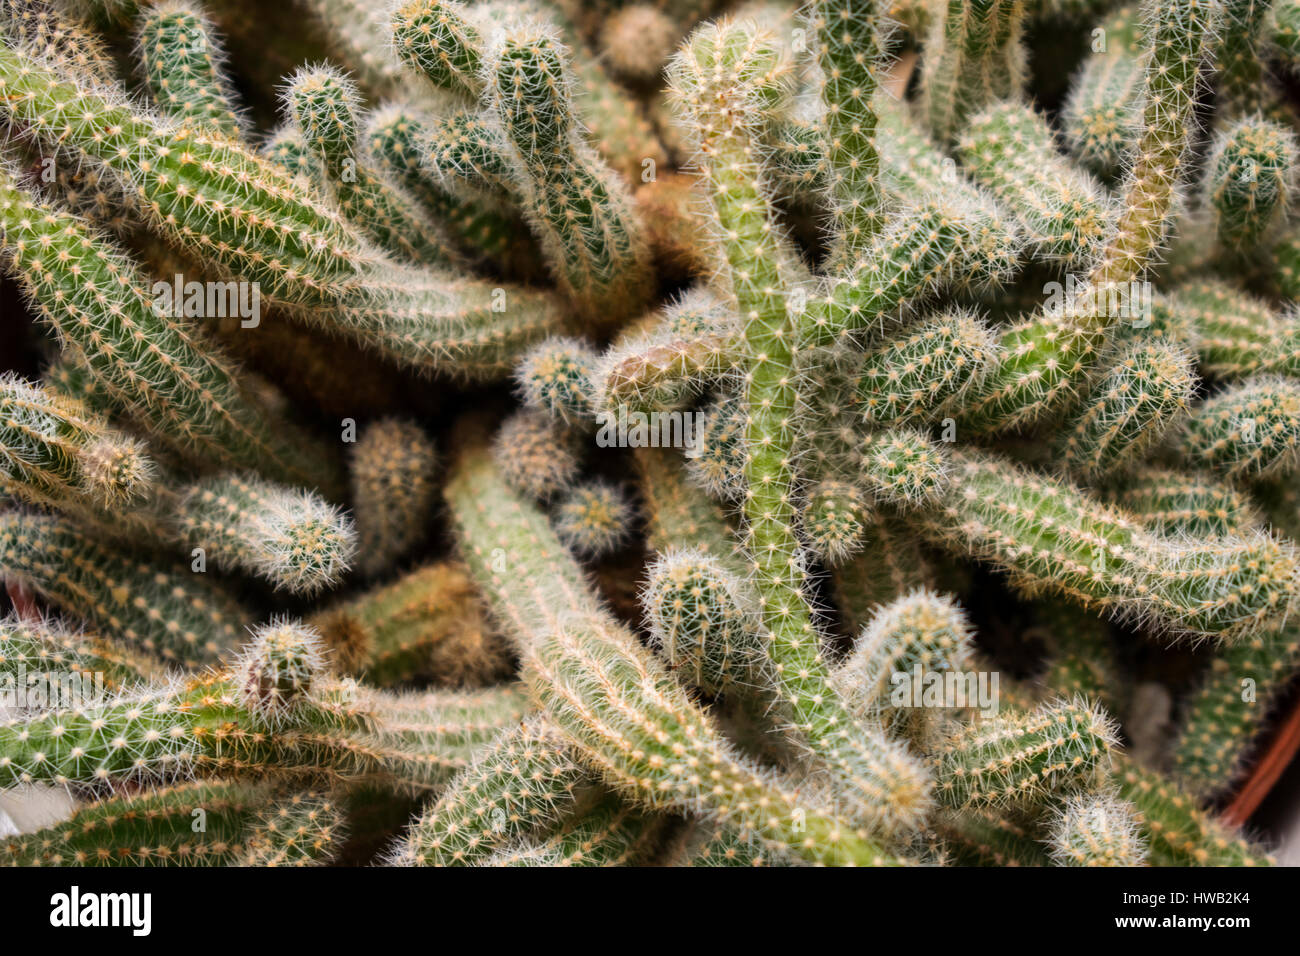 Close up of a cactus plant Stock Photo